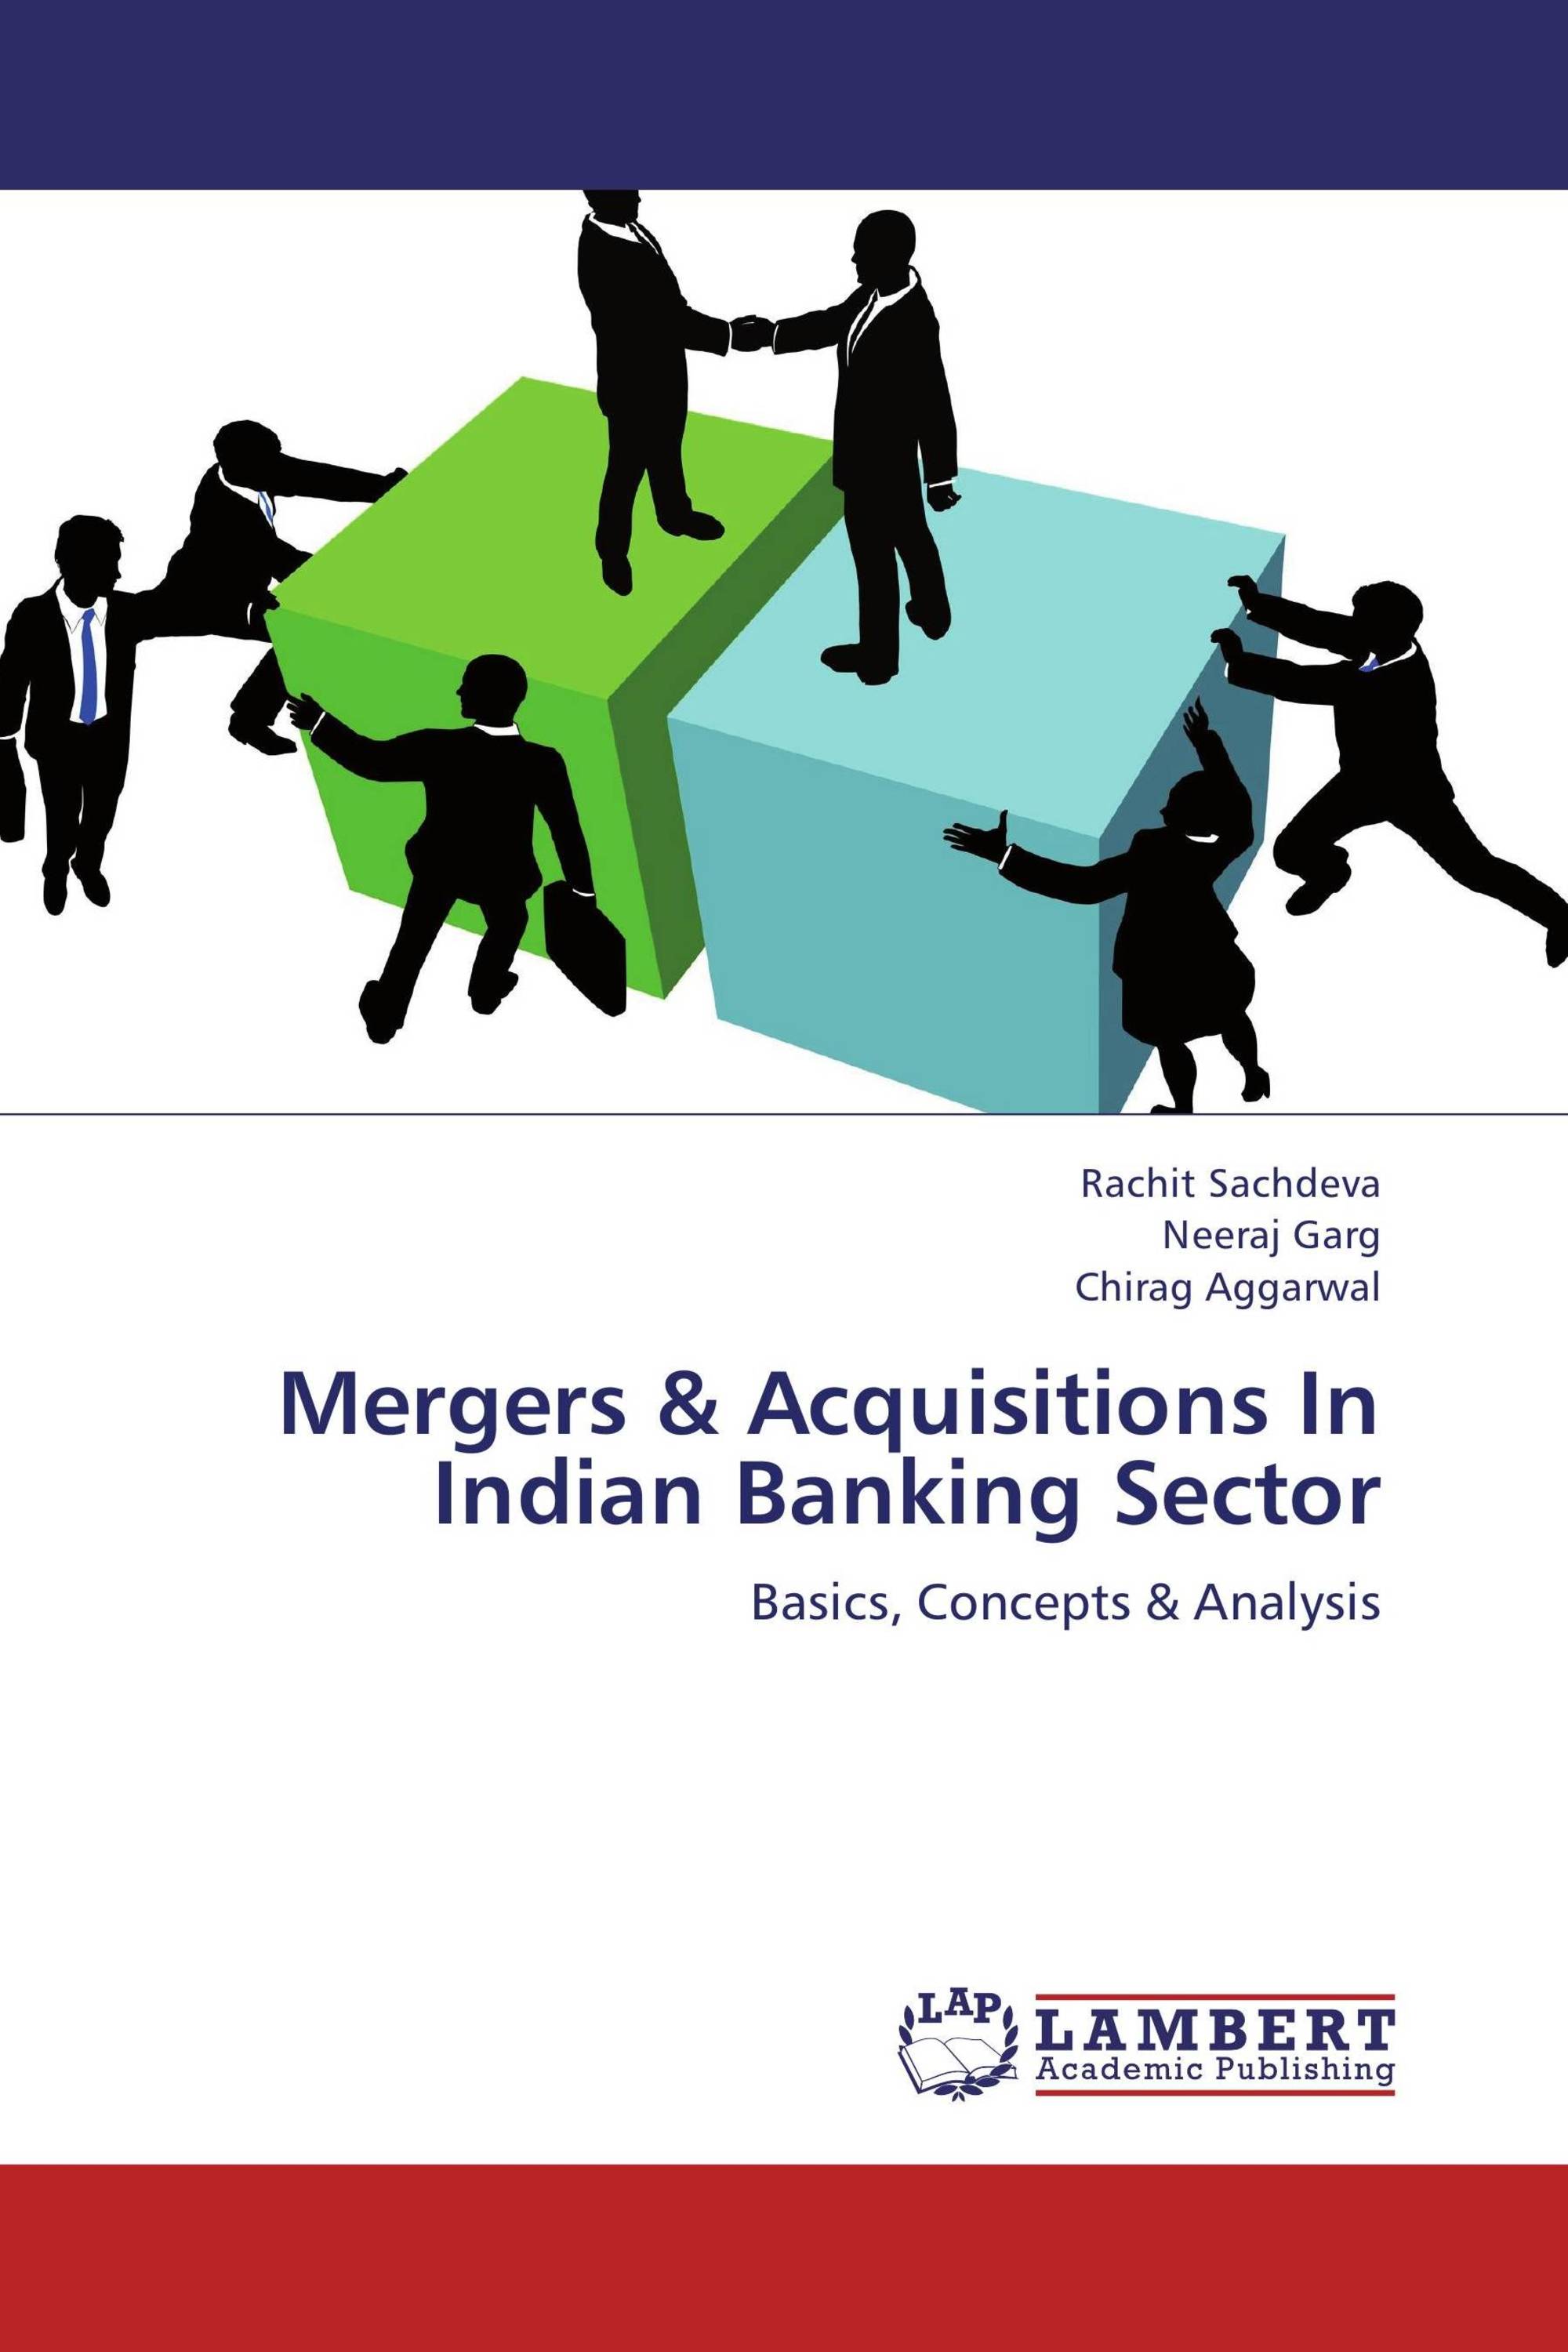 merger and acquisition case study pdf